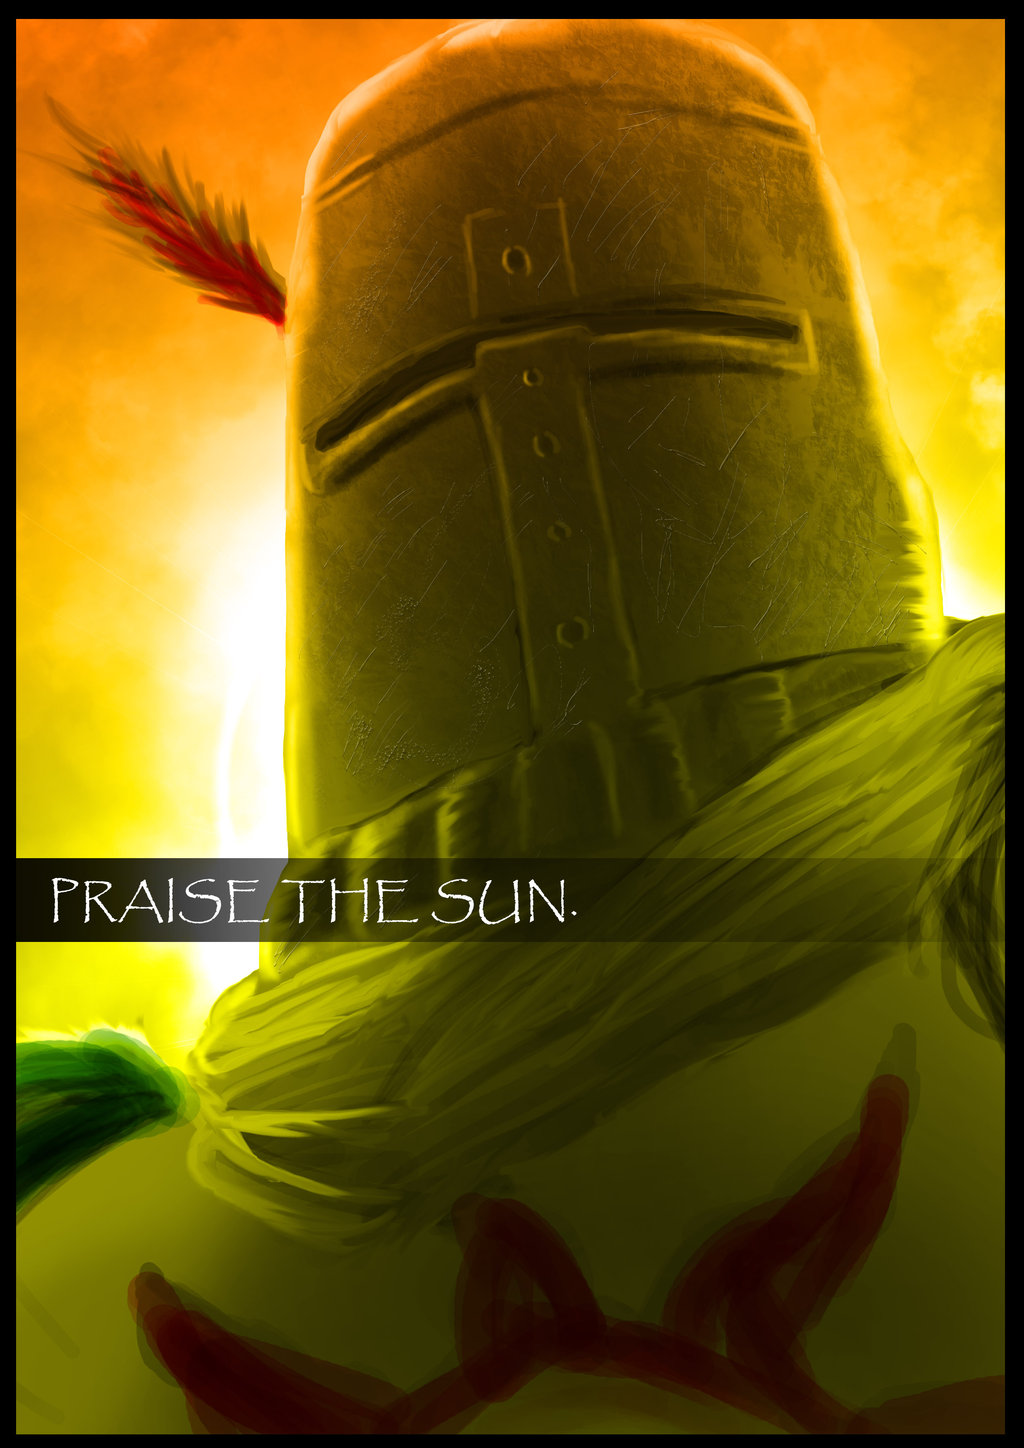 Praise the Sun by PaulVincent on